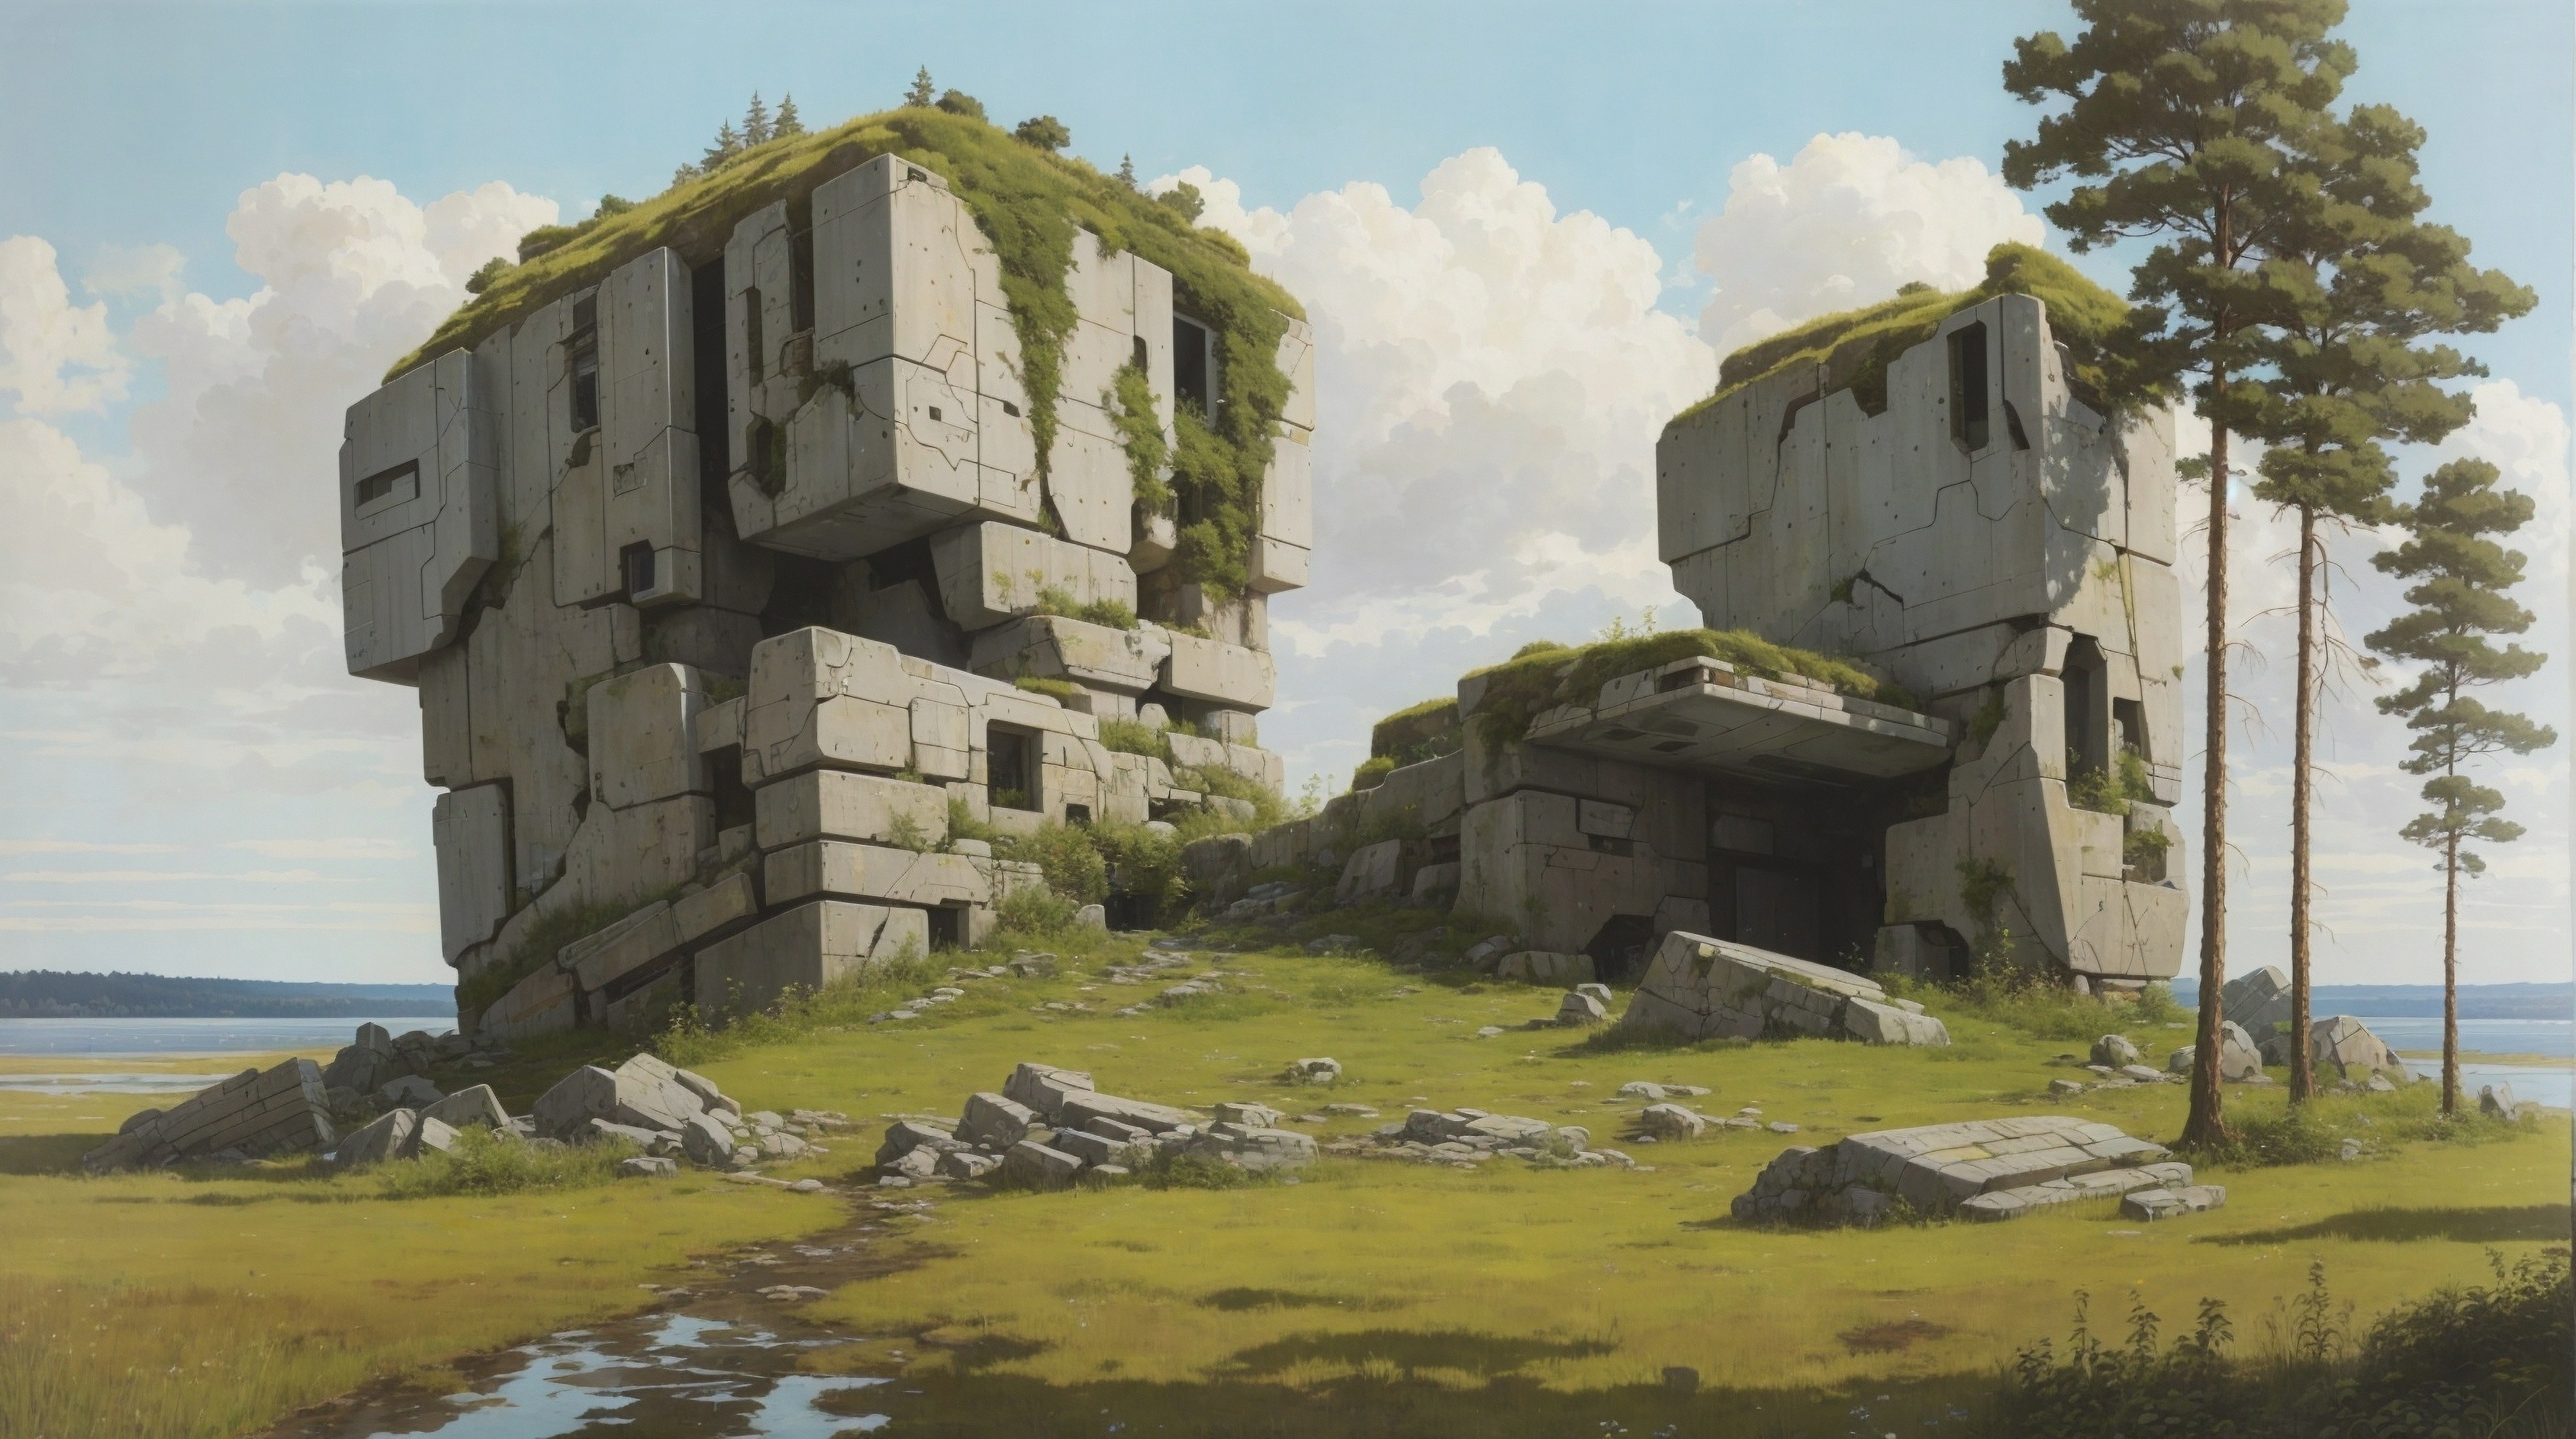 Landscape Science Fiction Rocks Ruins Environment Futuristic Megaliths Clouds Sky Trees Water 3552x1984